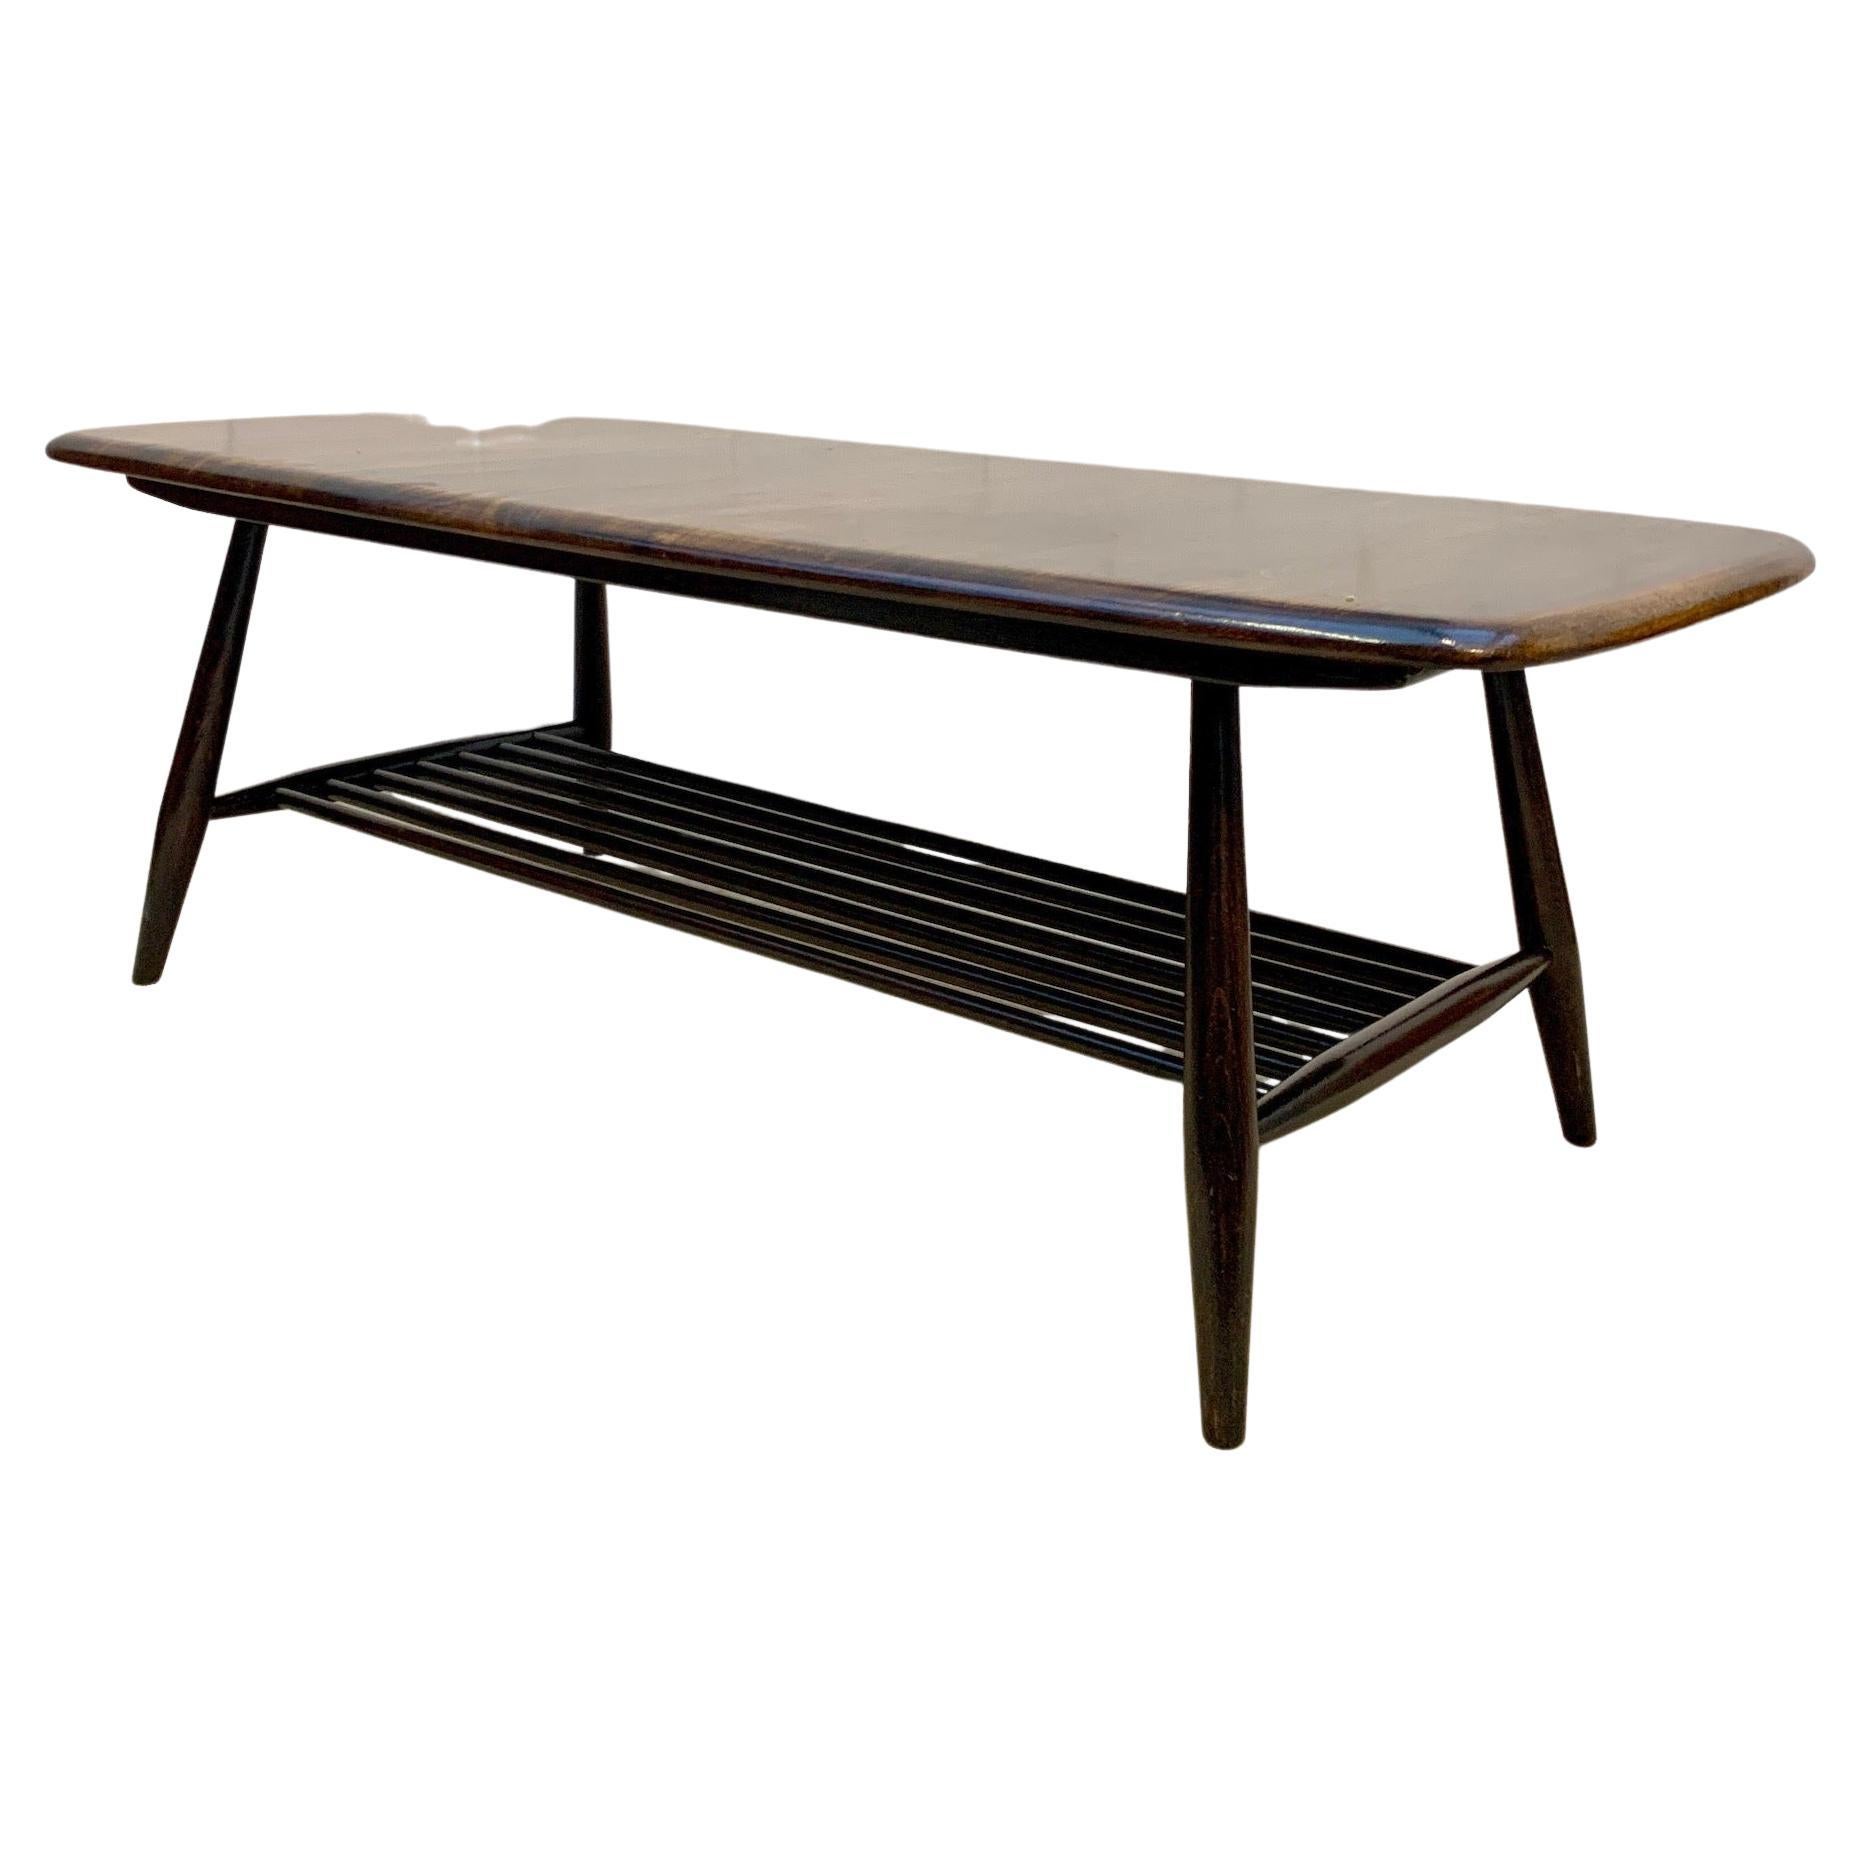 Ercol Model 459, midcentury coffee table with magazine rack

An iconic piece of British midcentury design, ready to add instant style and kudos to any modern interior.

The table measures 105cm L x 47cm D x 37cm H.